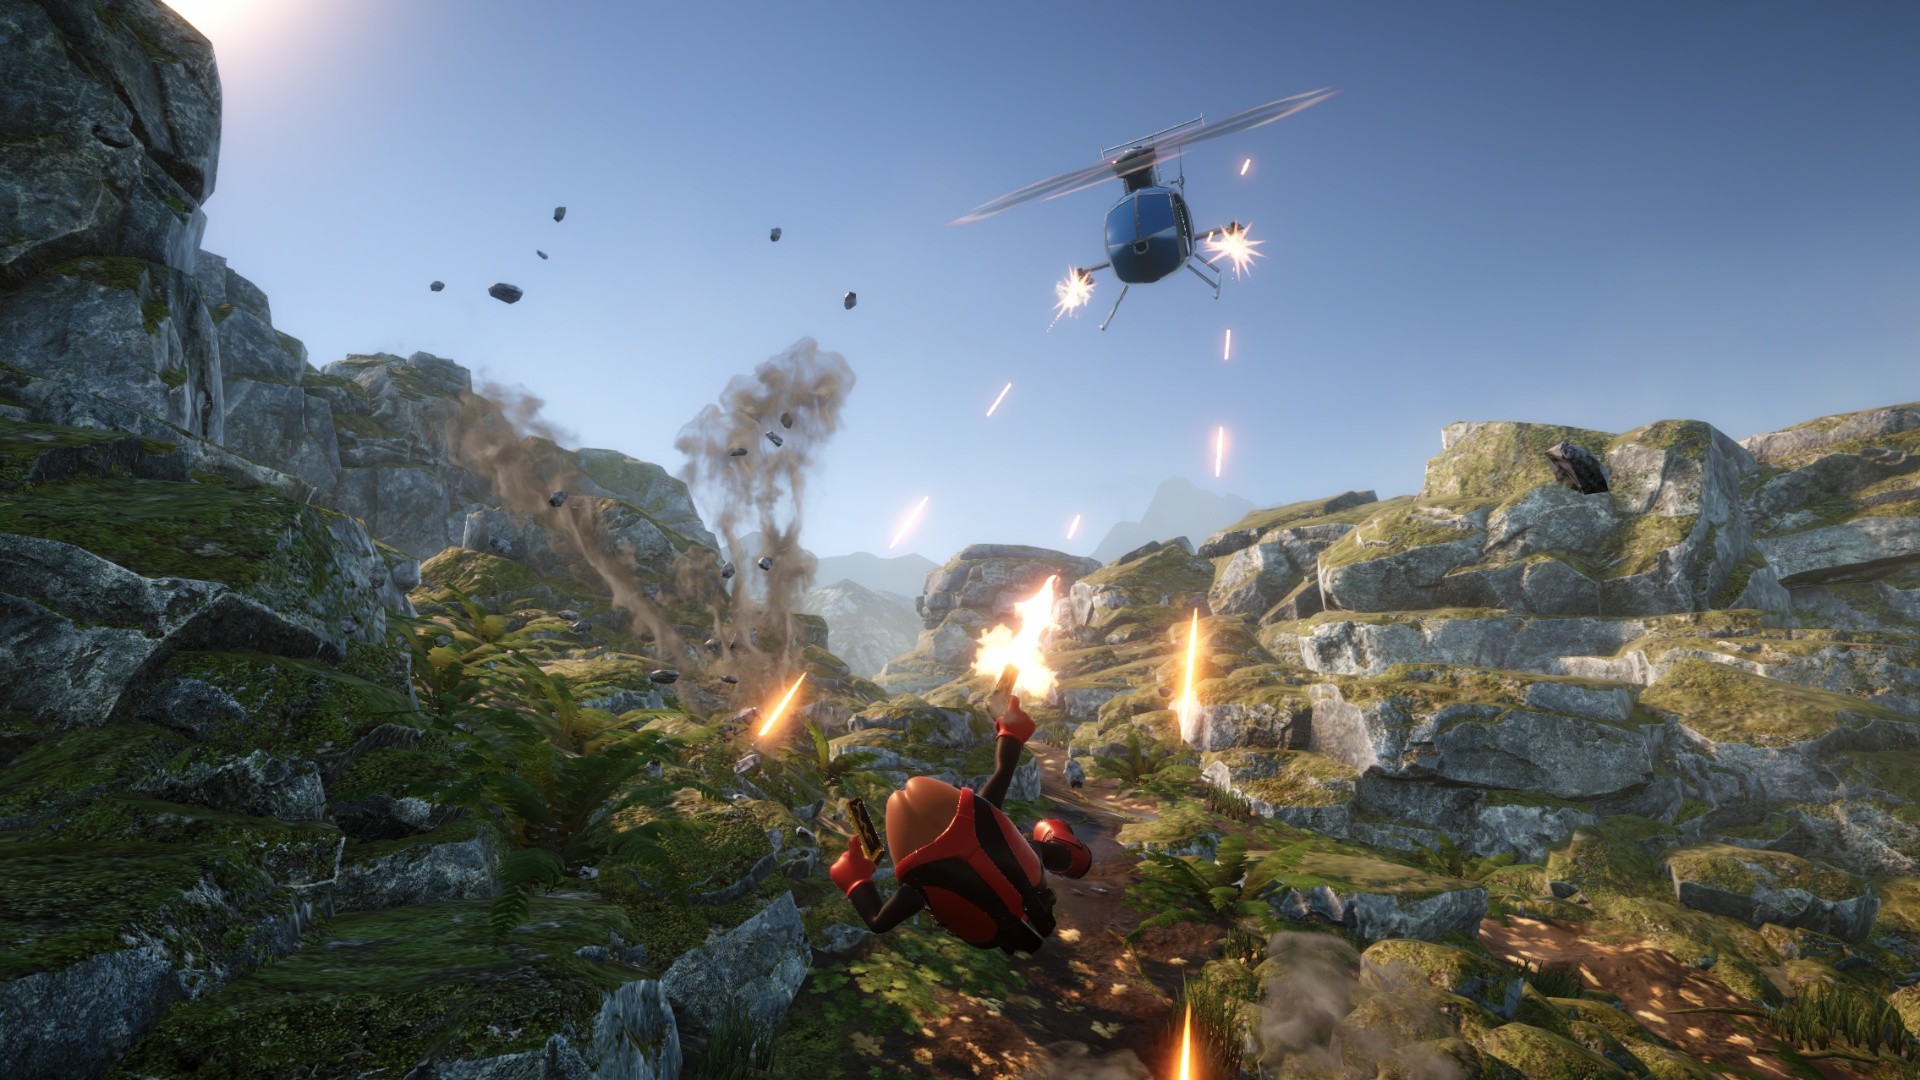 Killer Bean fights against a helicopter. The game has today received its first trailer.